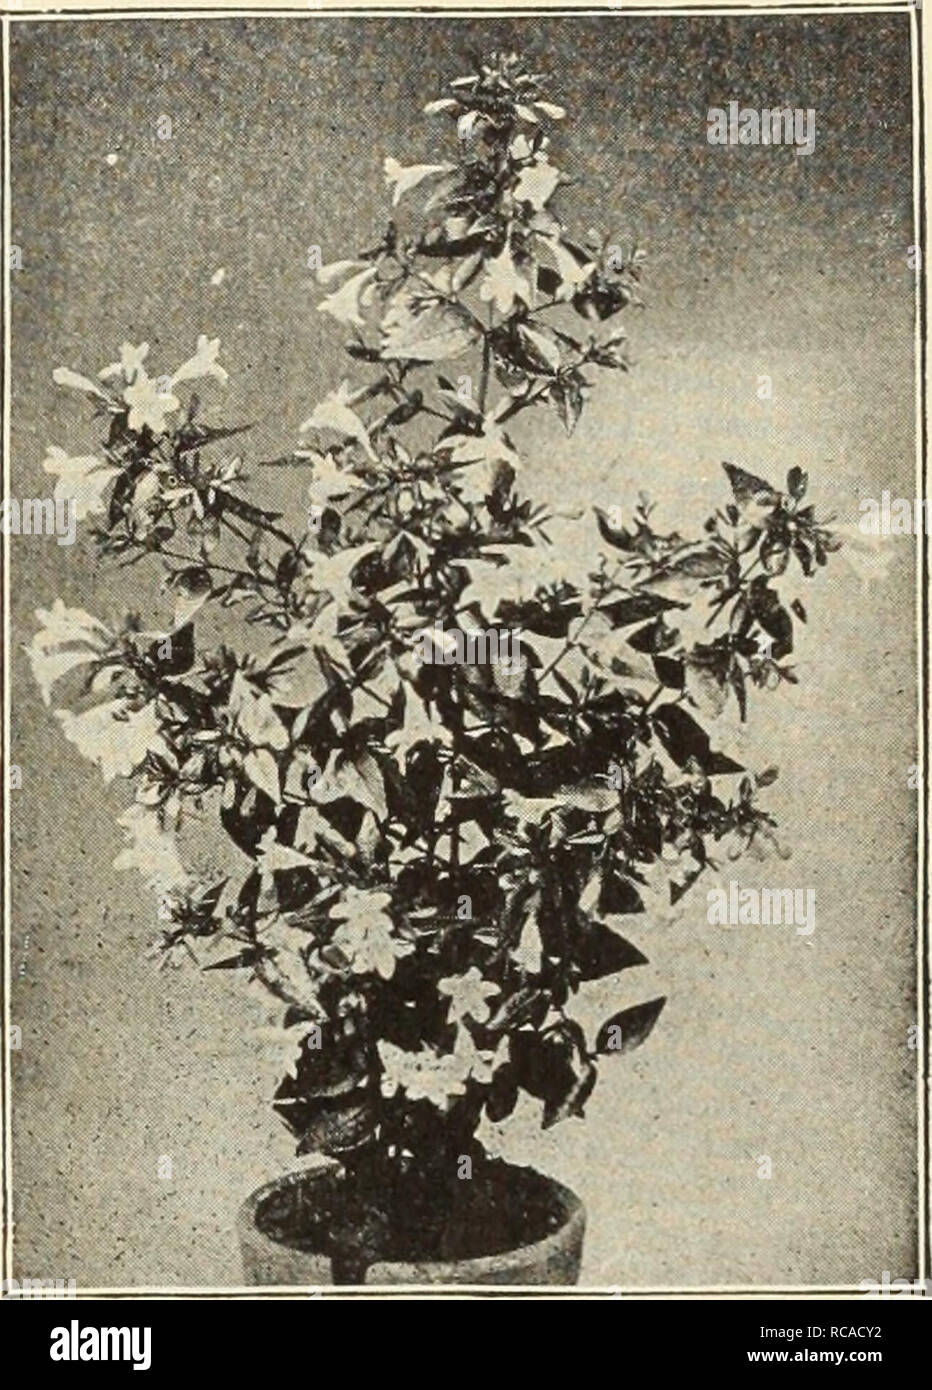 . Dreer's garden book : seventy-sixth annual edition 1914. Seeds Catalogs; Nursery stock Catalogs; Gardening Equipment and supplies Catalogs; Flowers Seeds Catalogs; Vegetables Seeds Catalogs; Fruit Seeds Catalogs. Ai-THKA Alba Plena. Abelia Chinensis Grandifloha. Abelia Chinensis Qrandiflora. A choice, small Shrub of graceful habit, producing through the entire summer and fall months white tinted lilac heather-like flowers in such abundance as to completely cover the plant. (See cut.) 25 cts. each; $2.50 per doz. Althea (Rose of Sharon). The ,ltheas are among the most valuable of our tall ha Stock Photo